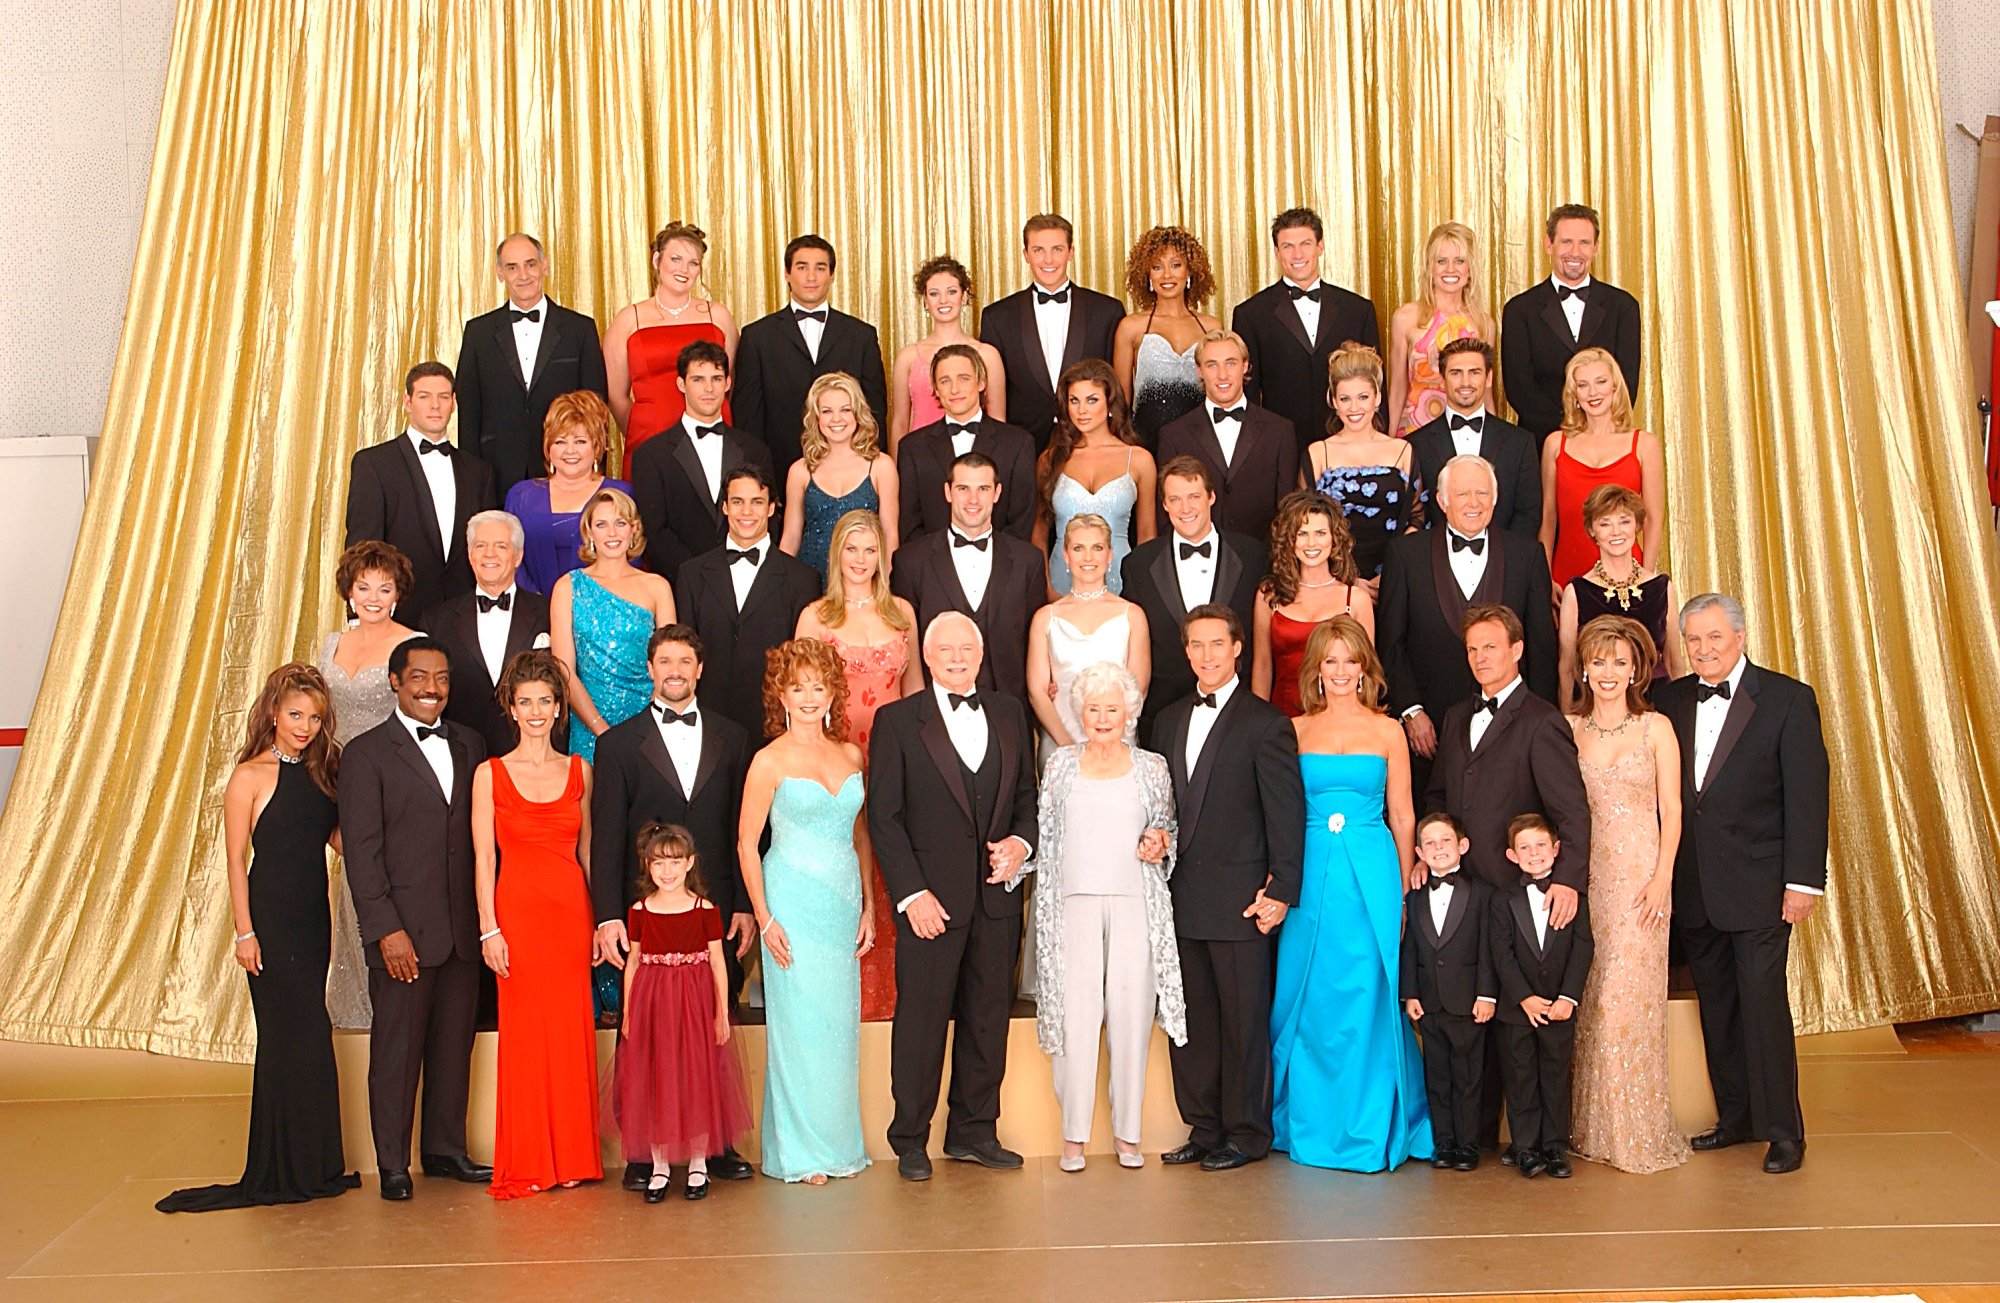 'Days of Our Lives' Comings and Goings Will a Soap Vet Return?